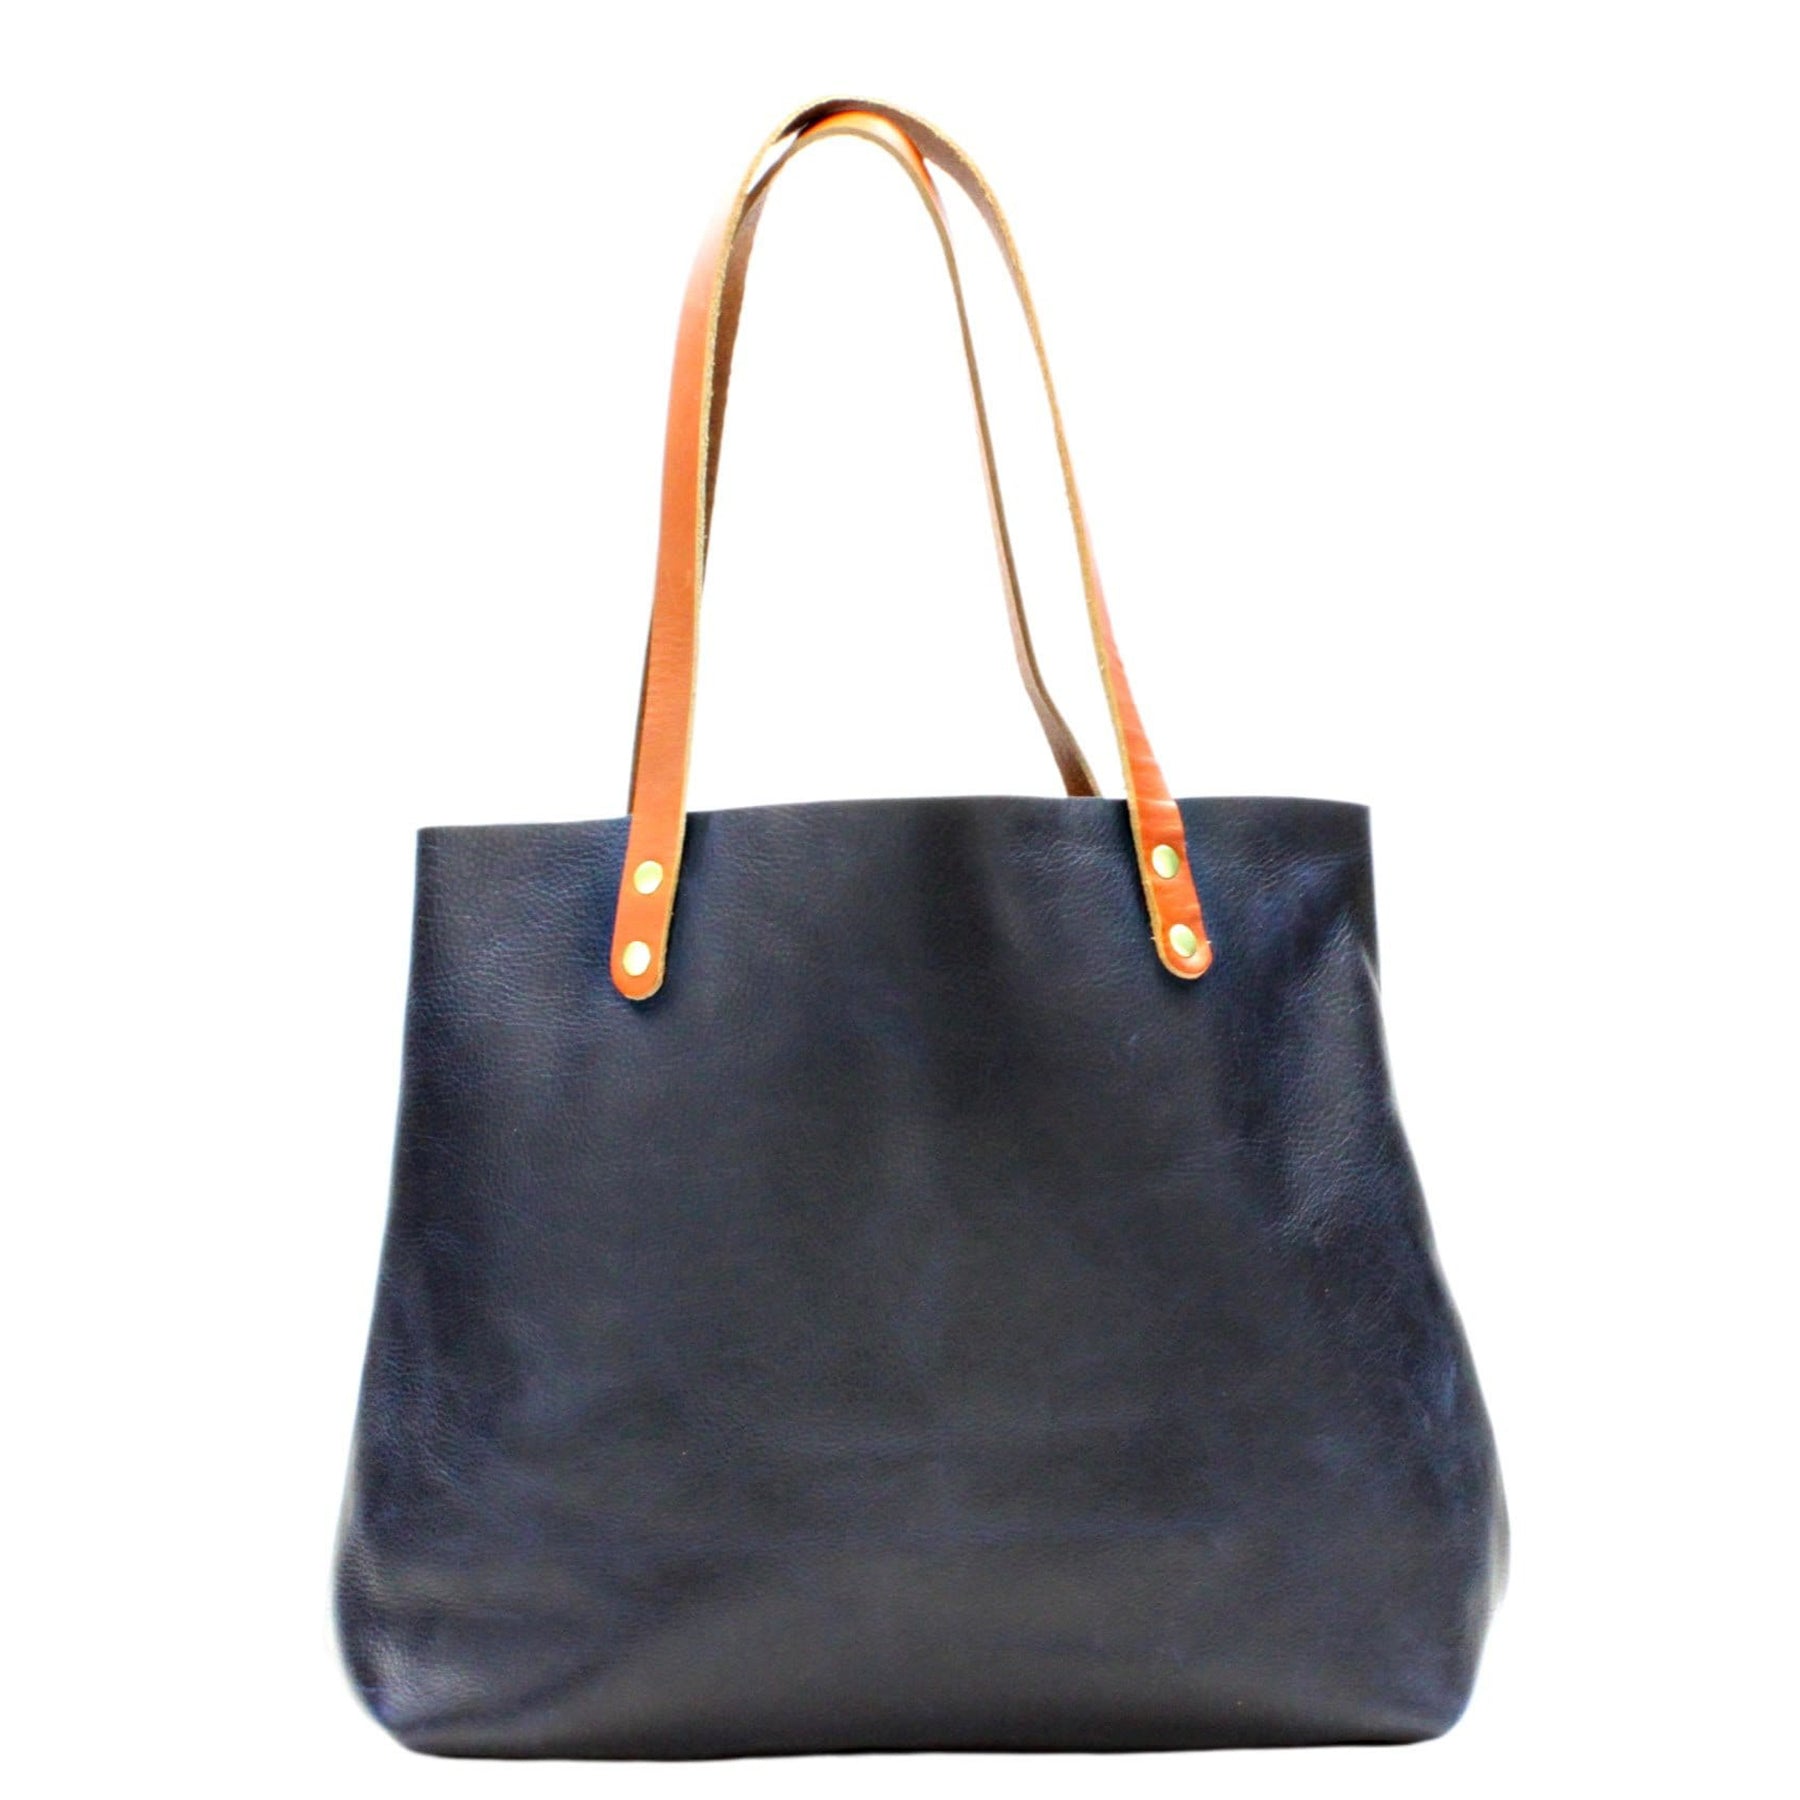 Kerry Noël Large Leather Tote Bag